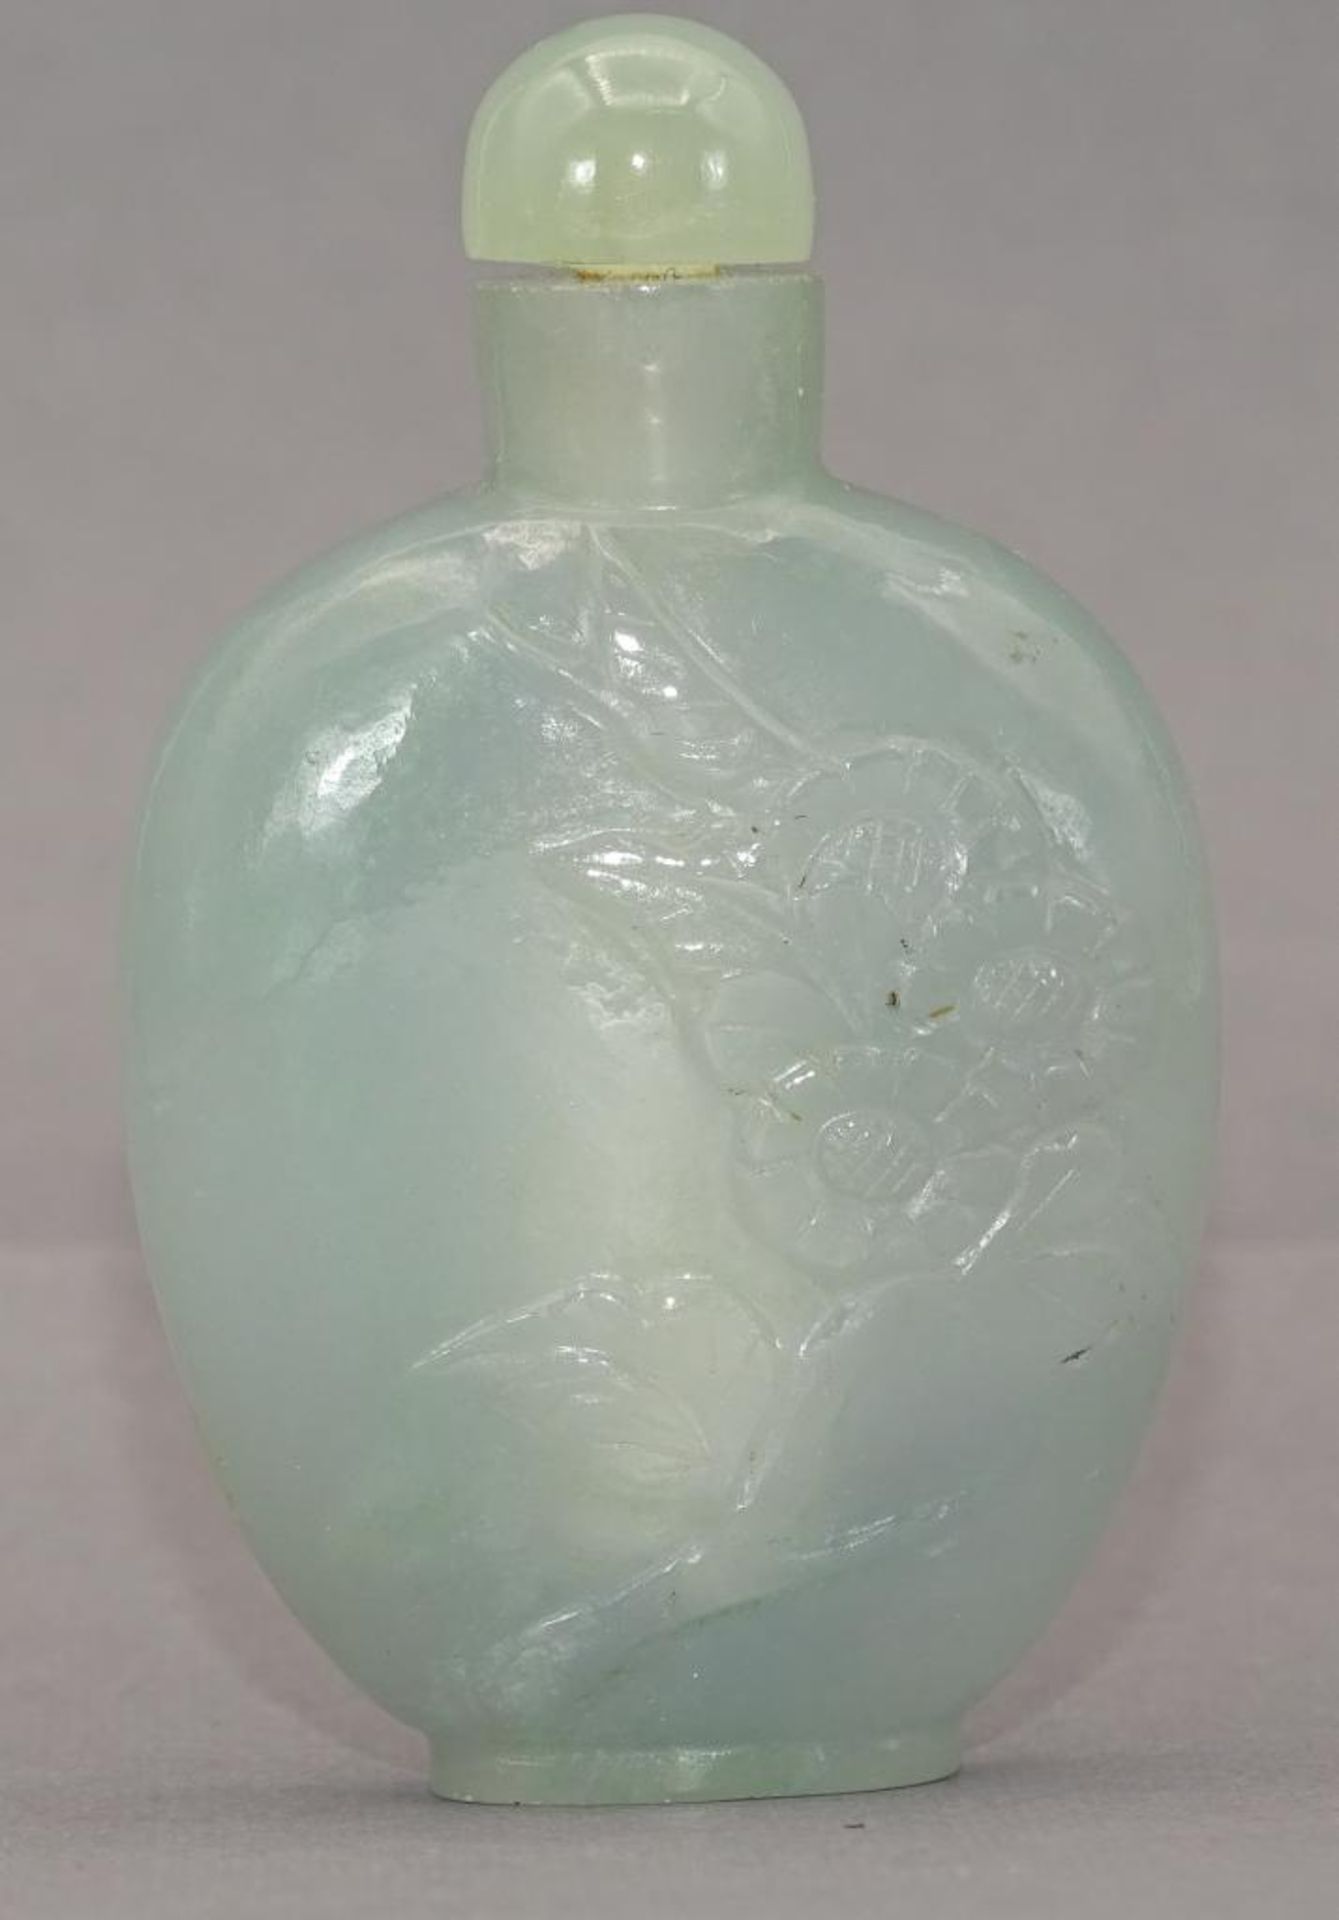 kl. Snuff Bottle,wohl Jade, China, h-6 cm, B-3,5 cm- - -22.61 % buyer's premium on the hammer - Image 3 of 8